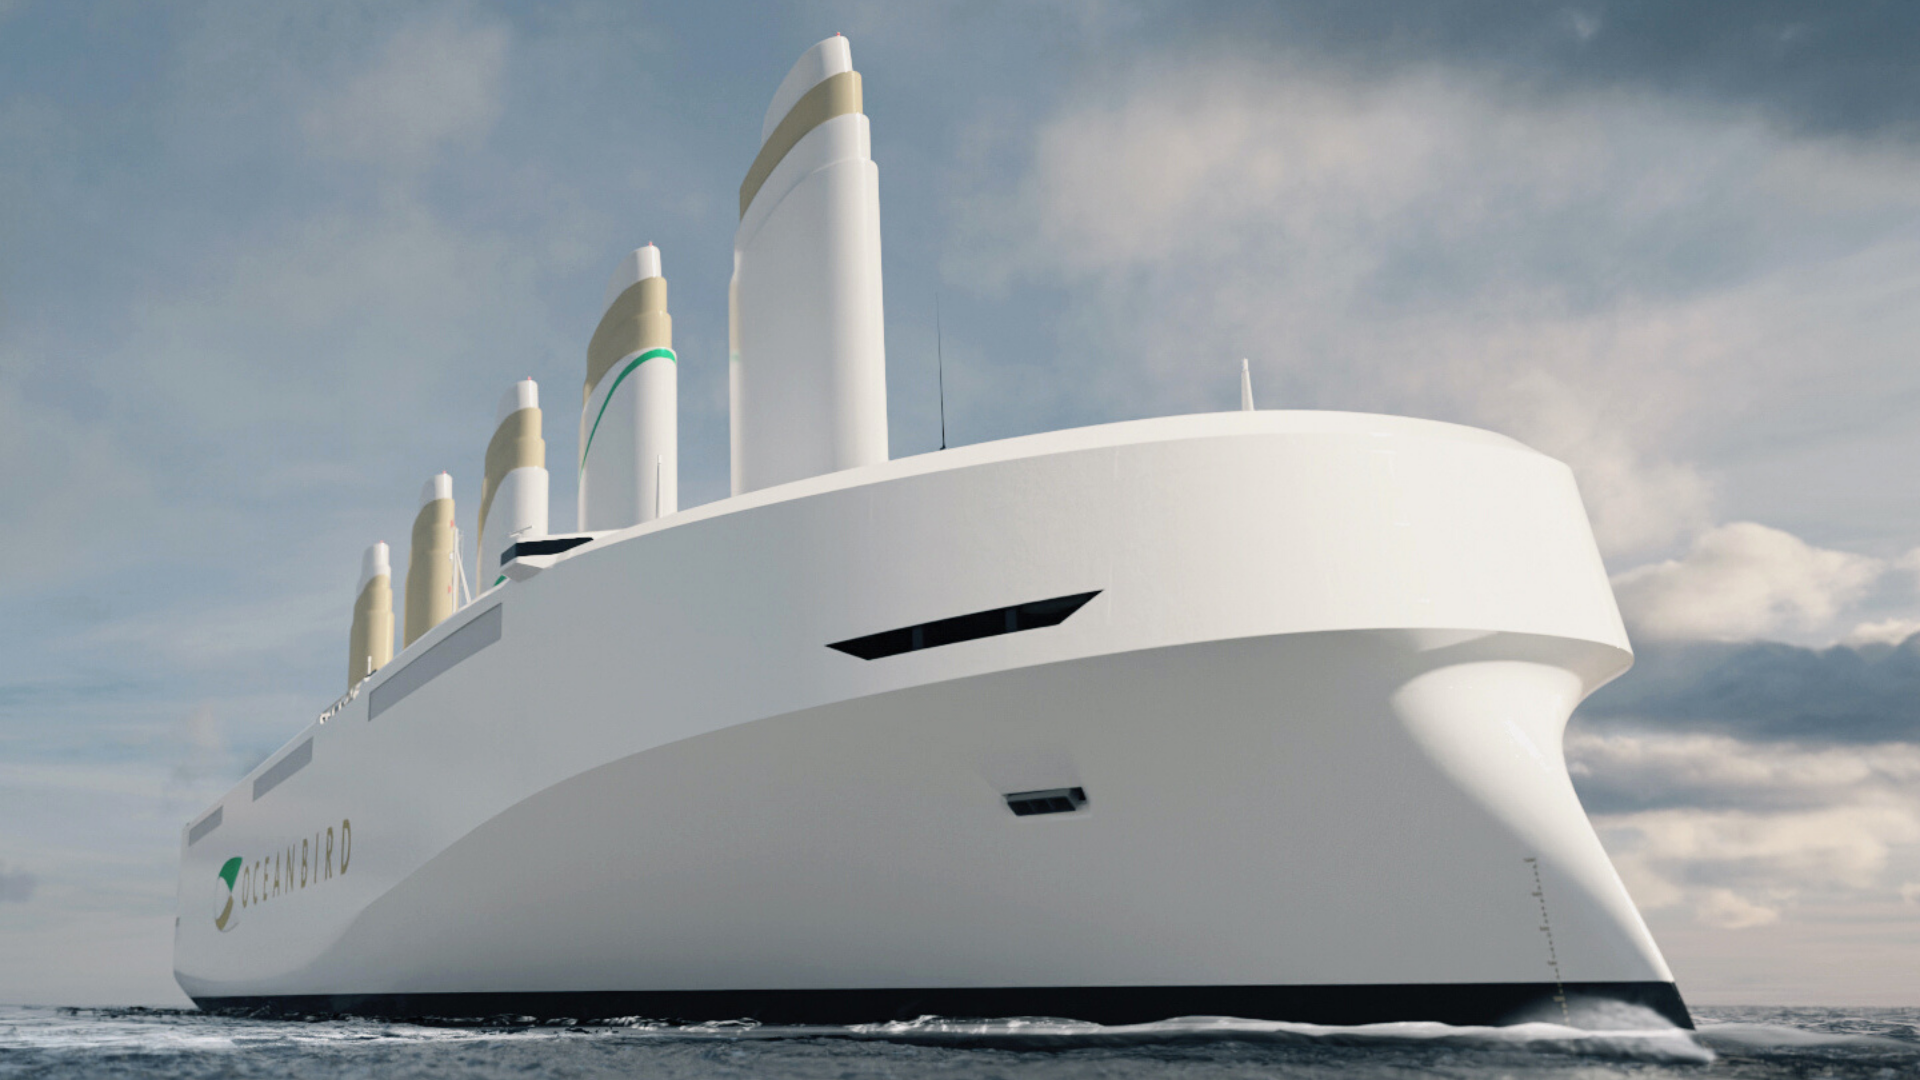 OceanBird vessel to make waves in fight to reduce emissions